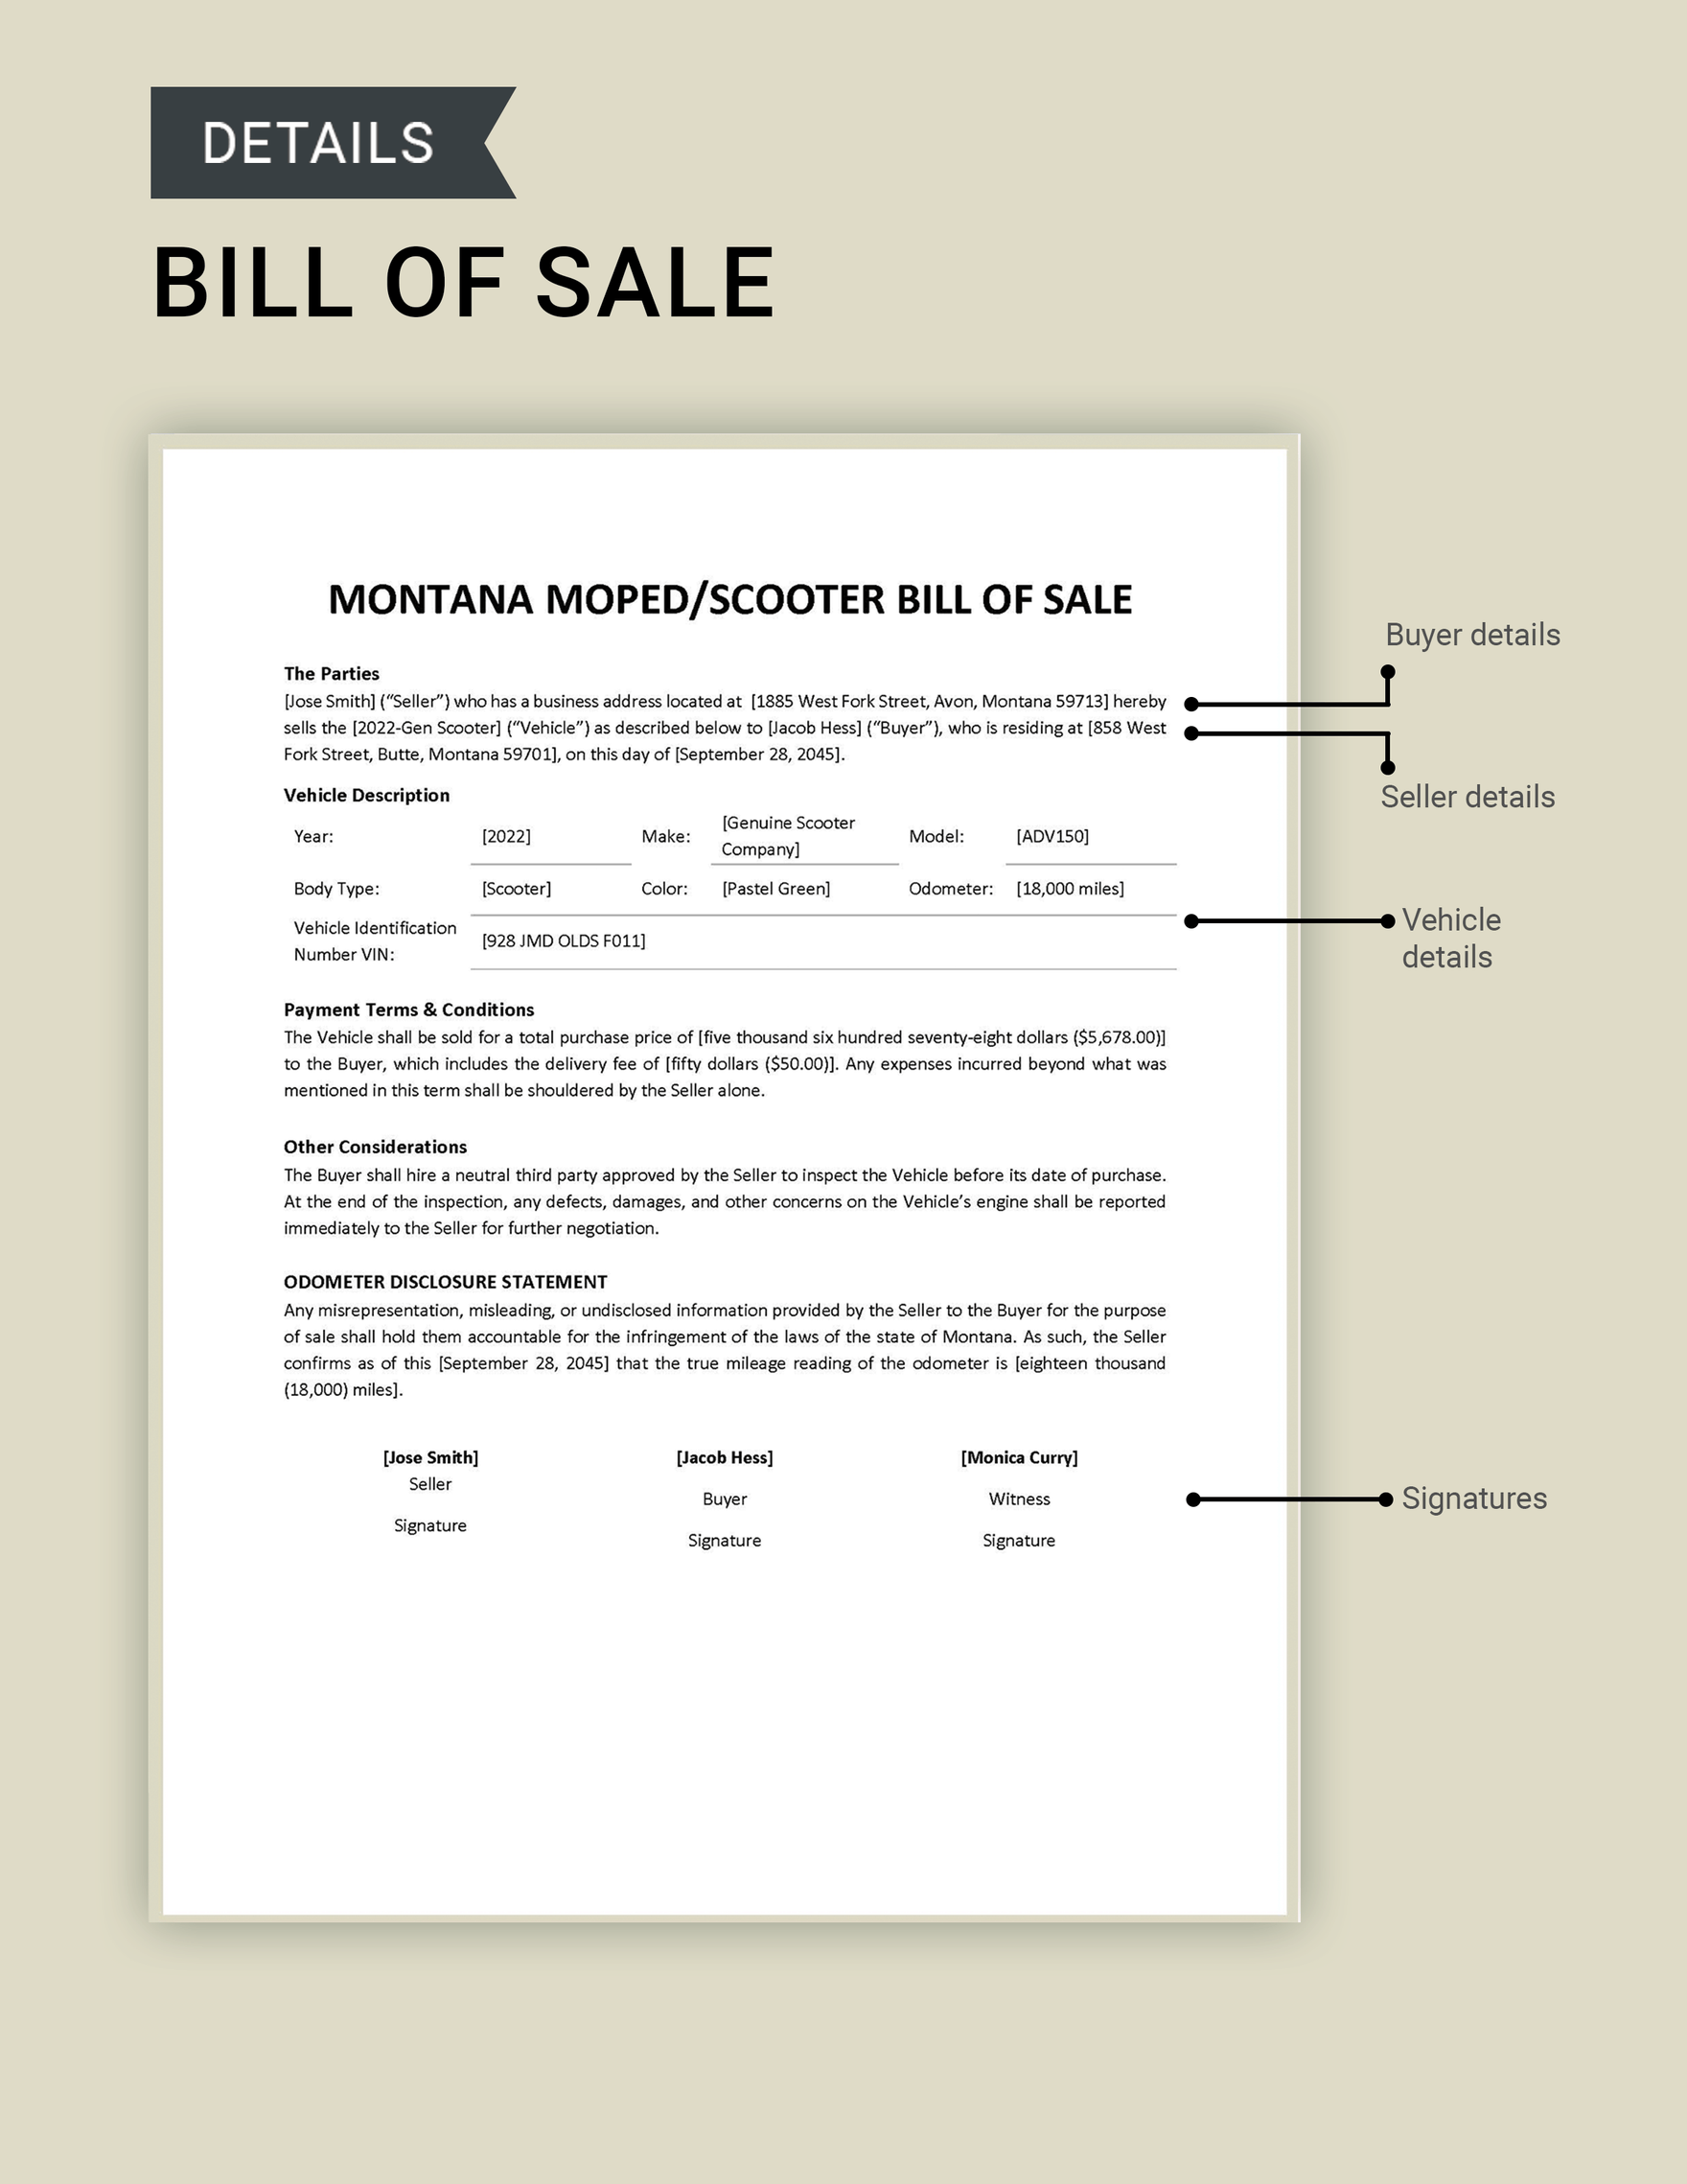 Montana Moped / Scooter Bill of Sale Template